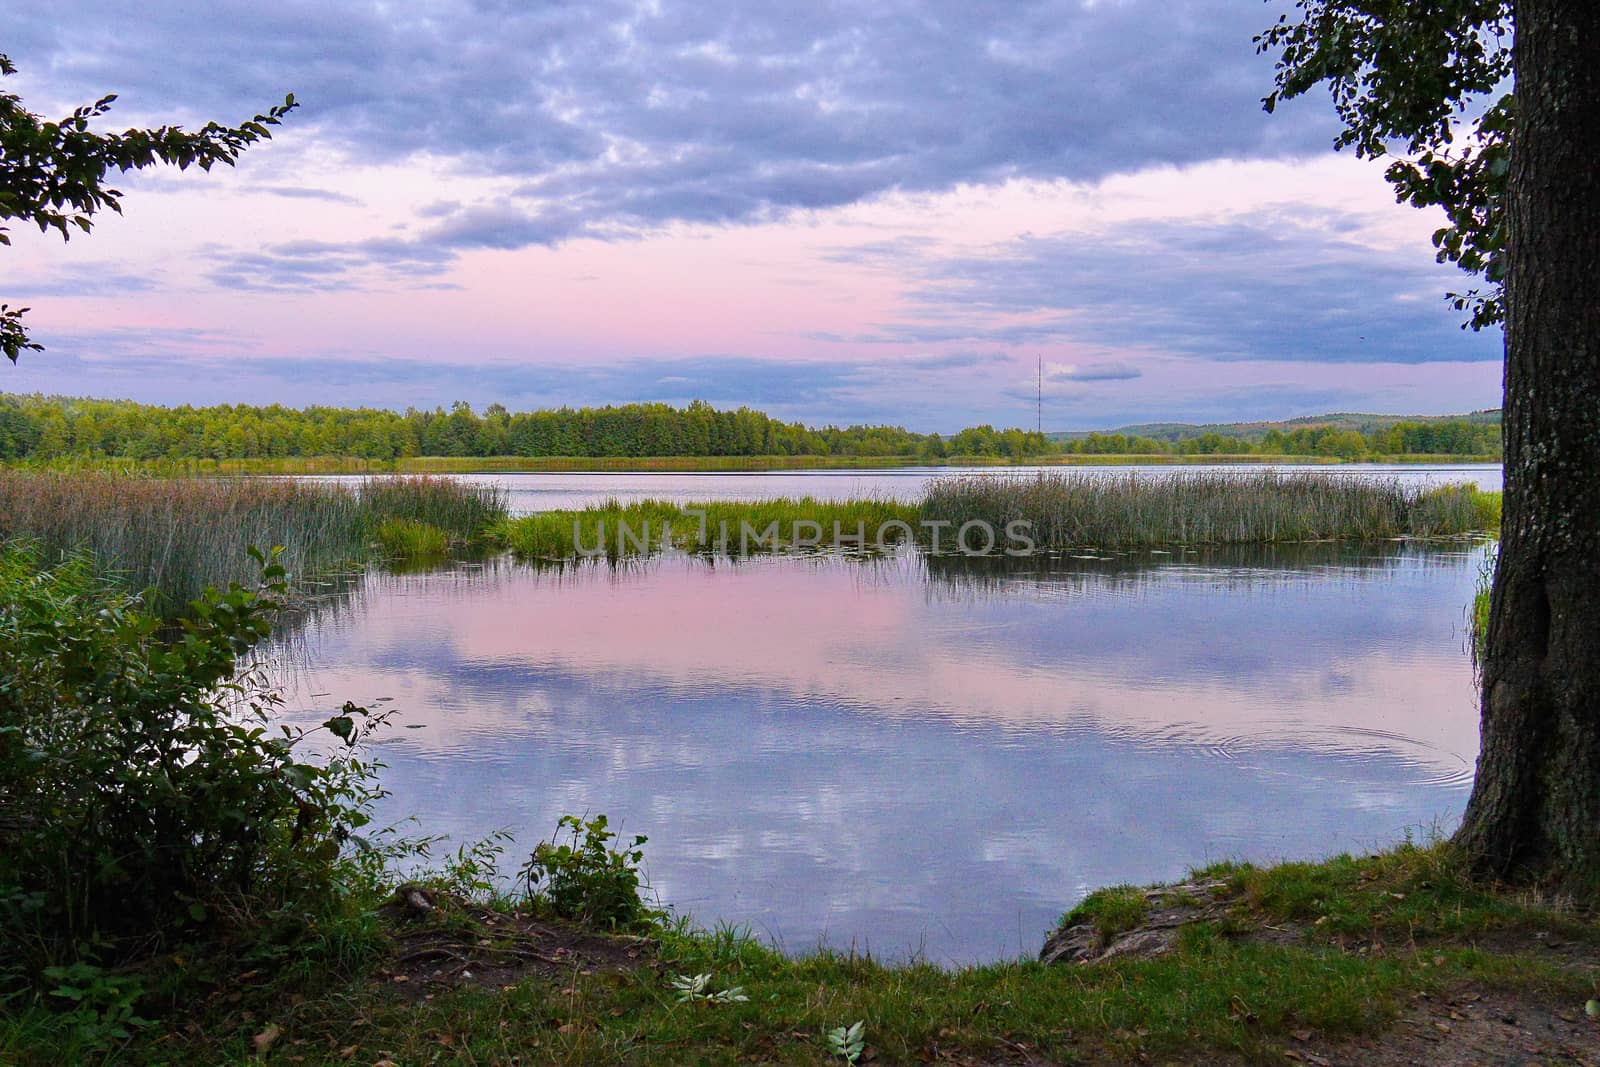 A pink-blue sunset and a beautiful lake divided by a scythe with reeds and other plants by Adamchuk